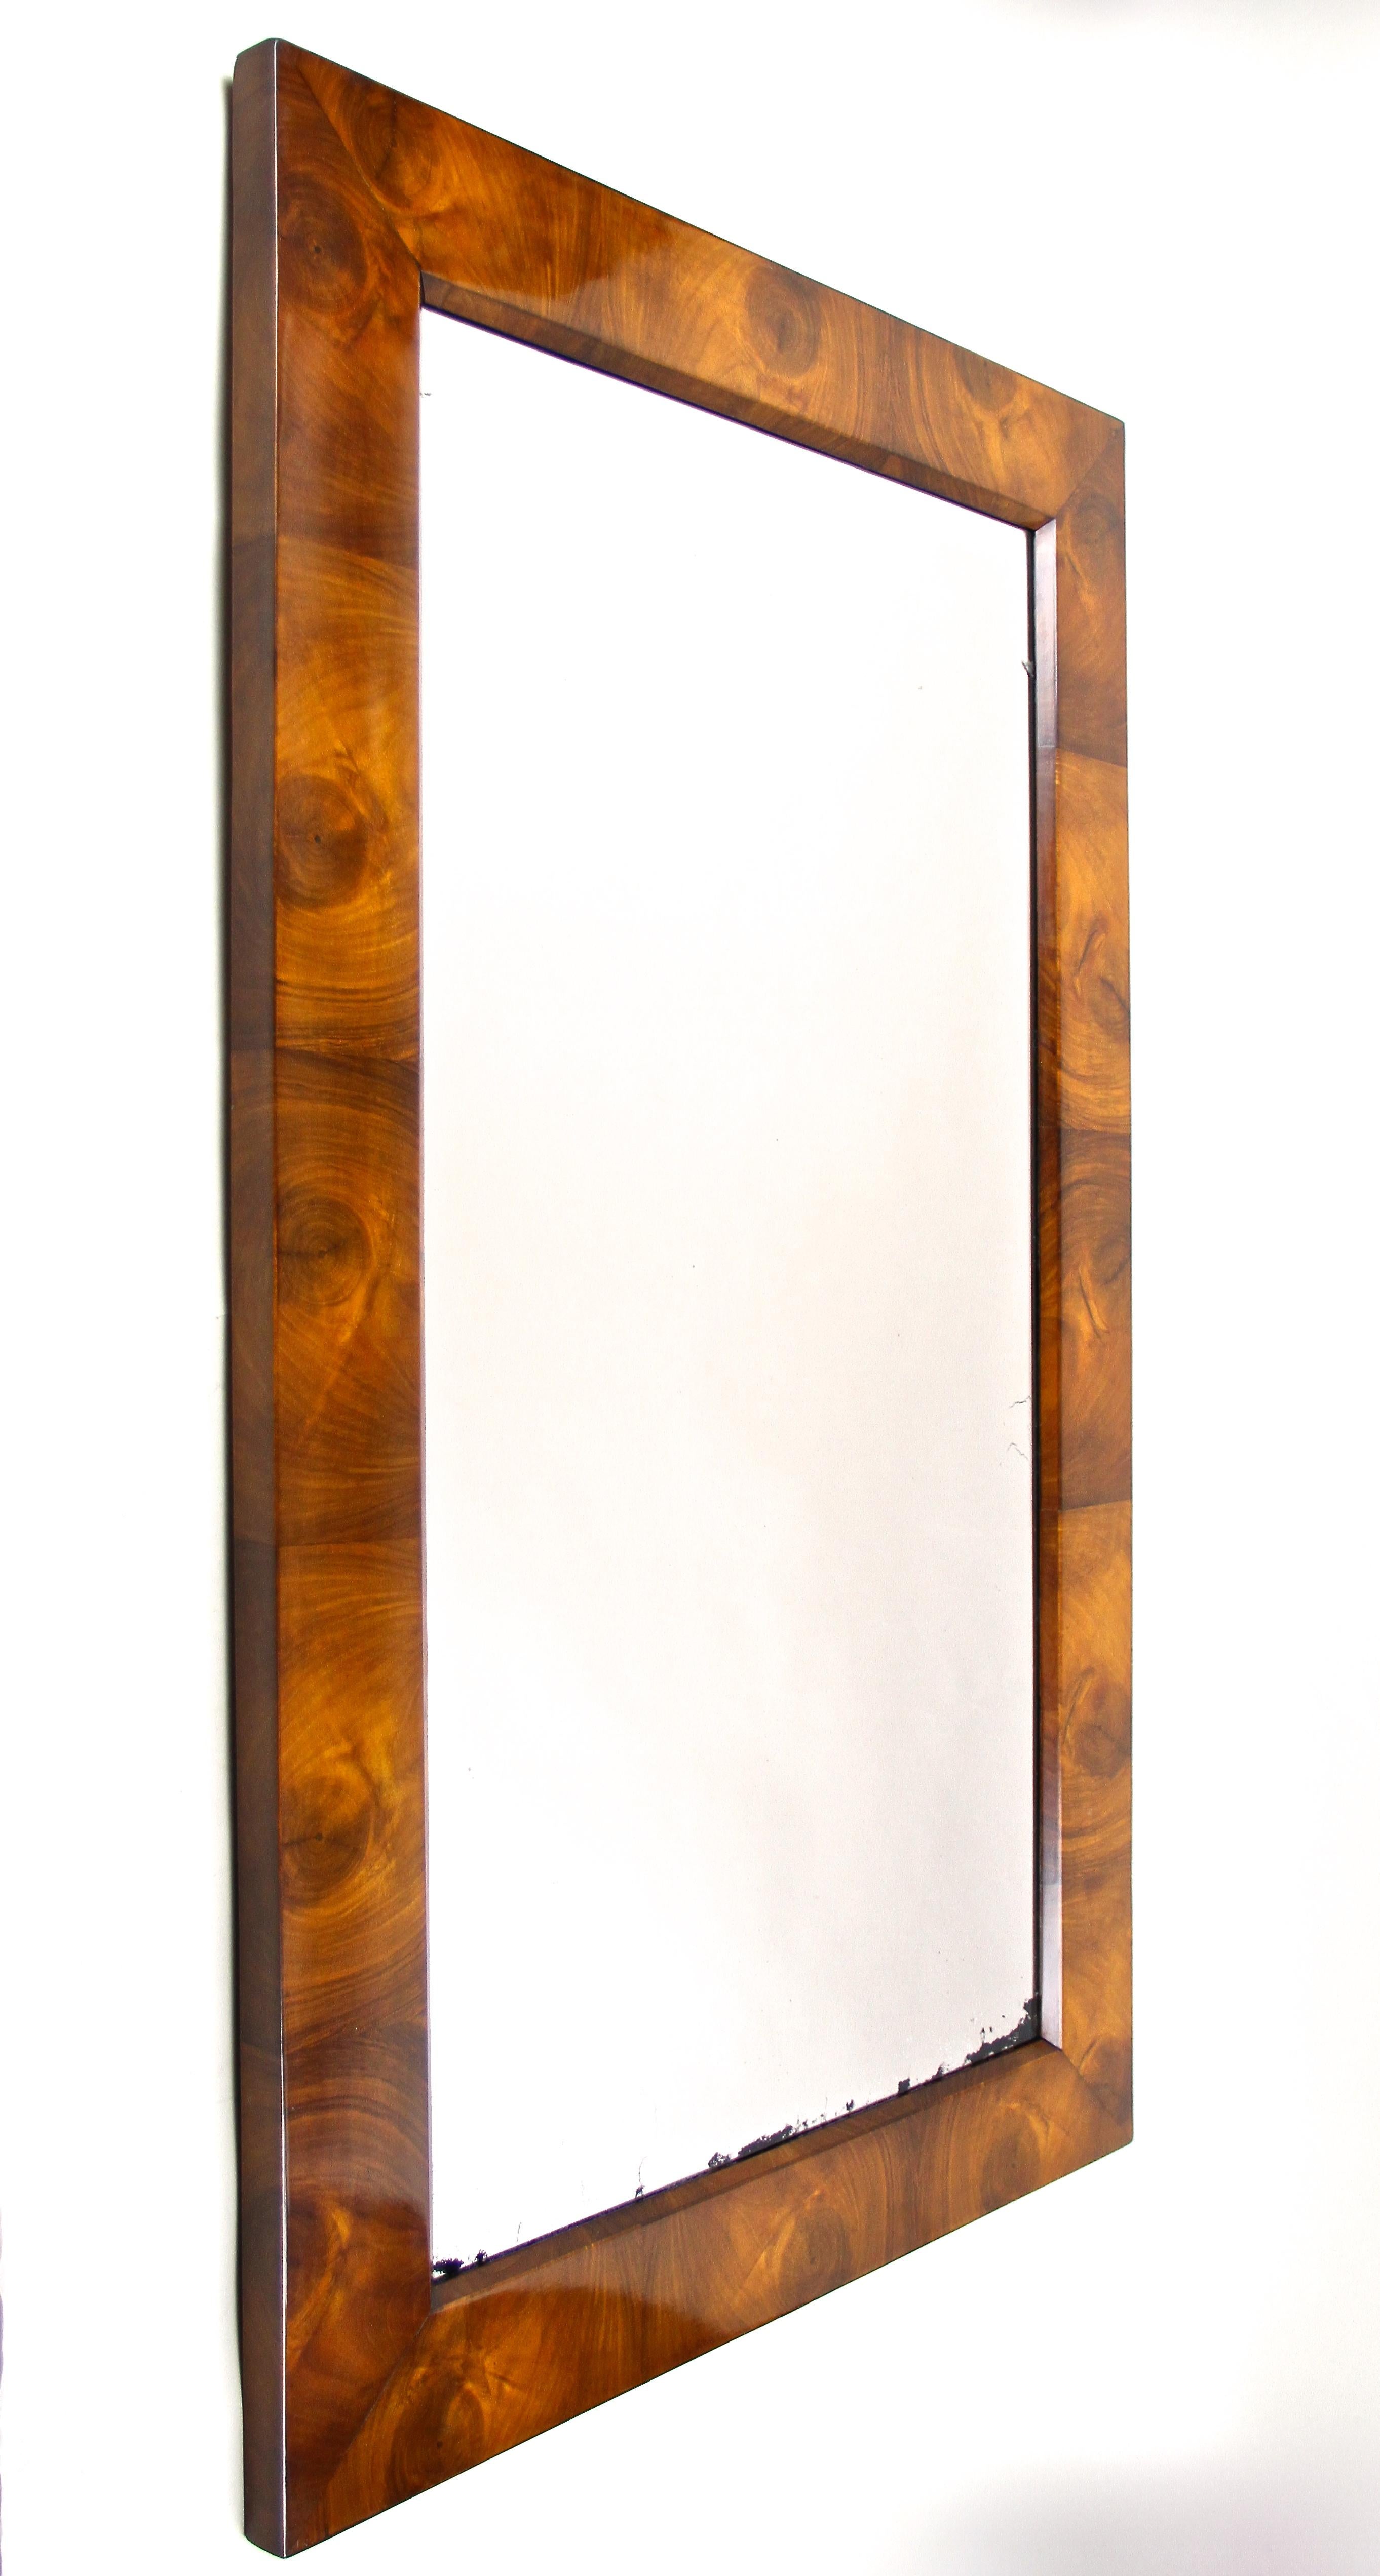 Striking Biedermeier wall mirror from the early 19th century in Vienna/ Austria around 1820. This magnificent wall mirror from the very early renown Biedermeier period comes with a traditional overlapped substructure made of spruce wood and